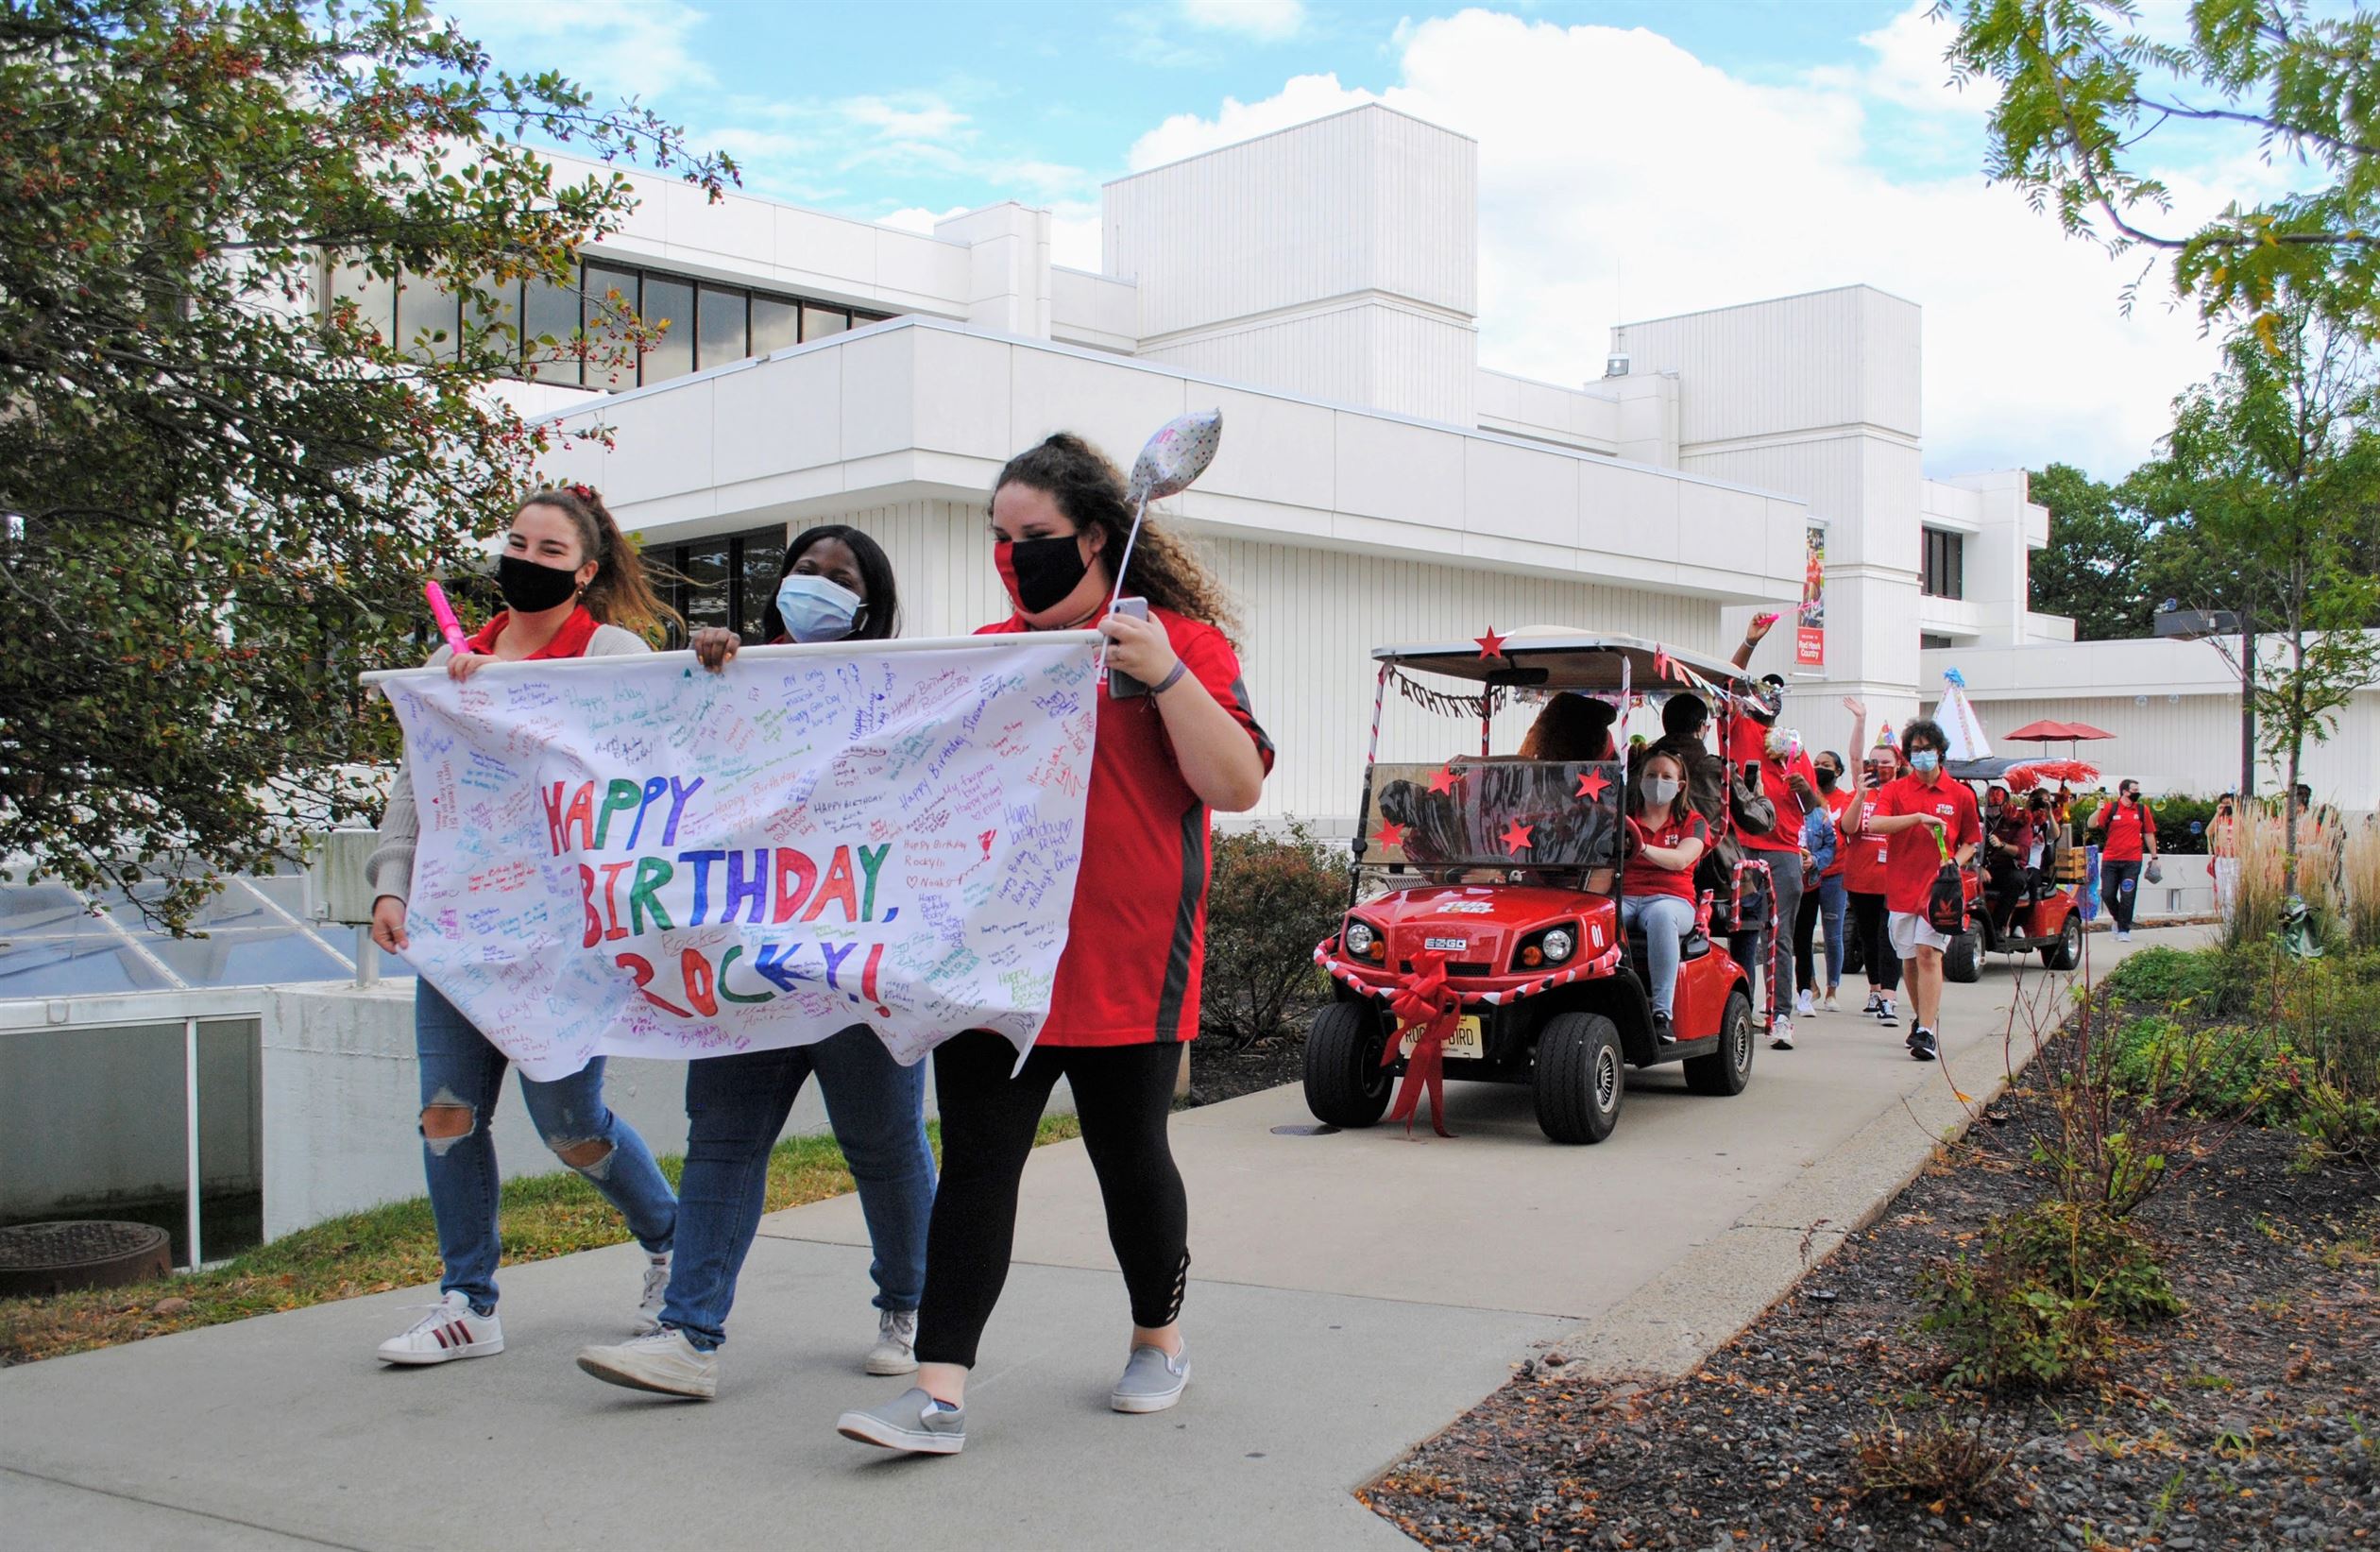 Rocky's birthday parade beginning its procession from the Student Center. Michael Giannotti | The Montclarion